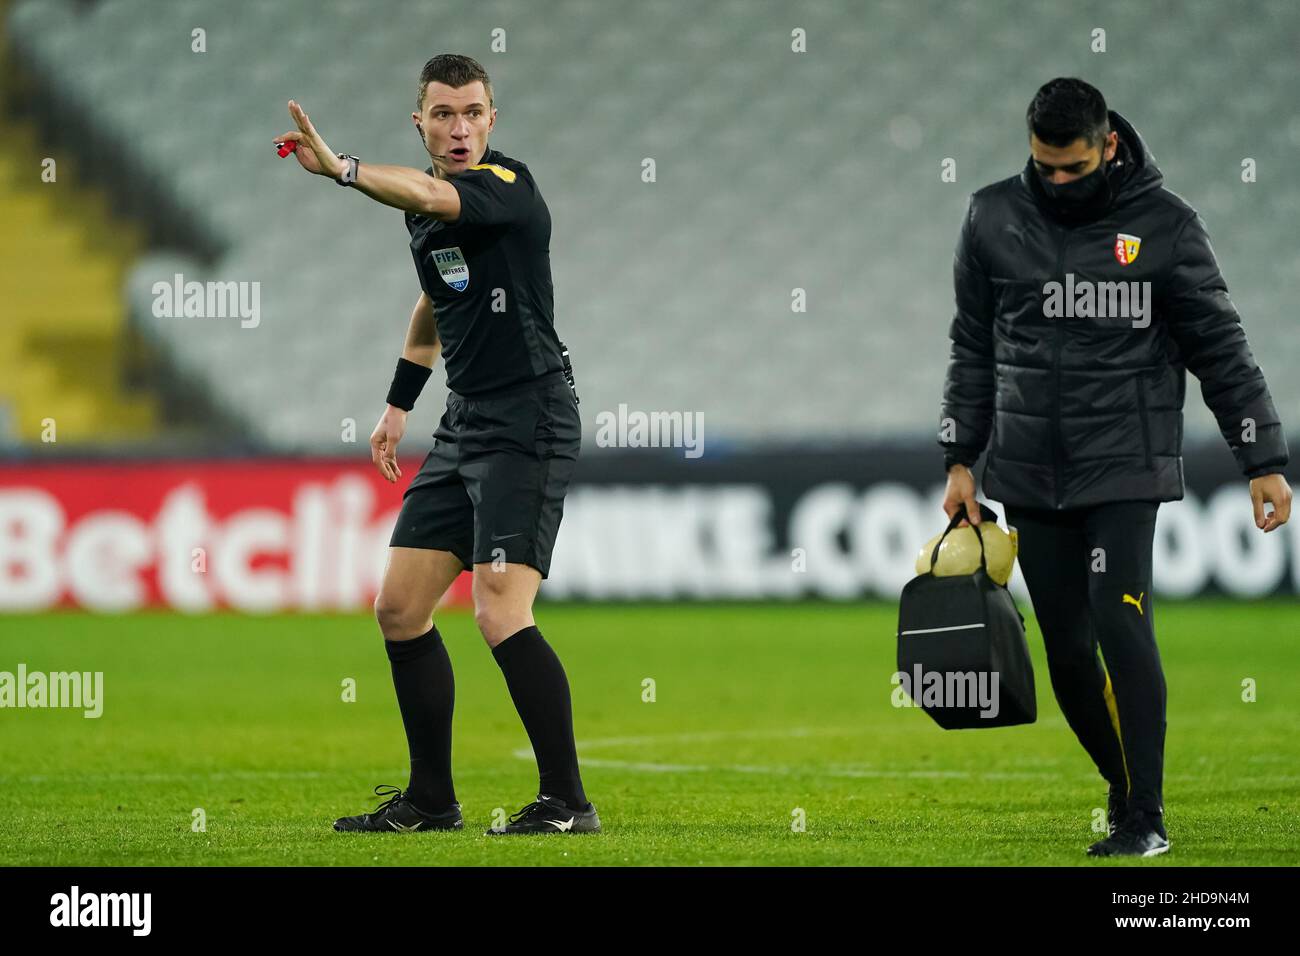 LENS, FRANCE - JANUARY 4: Referee Willy Delajod during the French Cup match between Racing Club de Lens and LOSC Lille at Stade Bollaert-Delelis on January 4, 2022 in Lens, France (Photo by Jeroen Meuwsen/Orange Pictures) Stock Photo